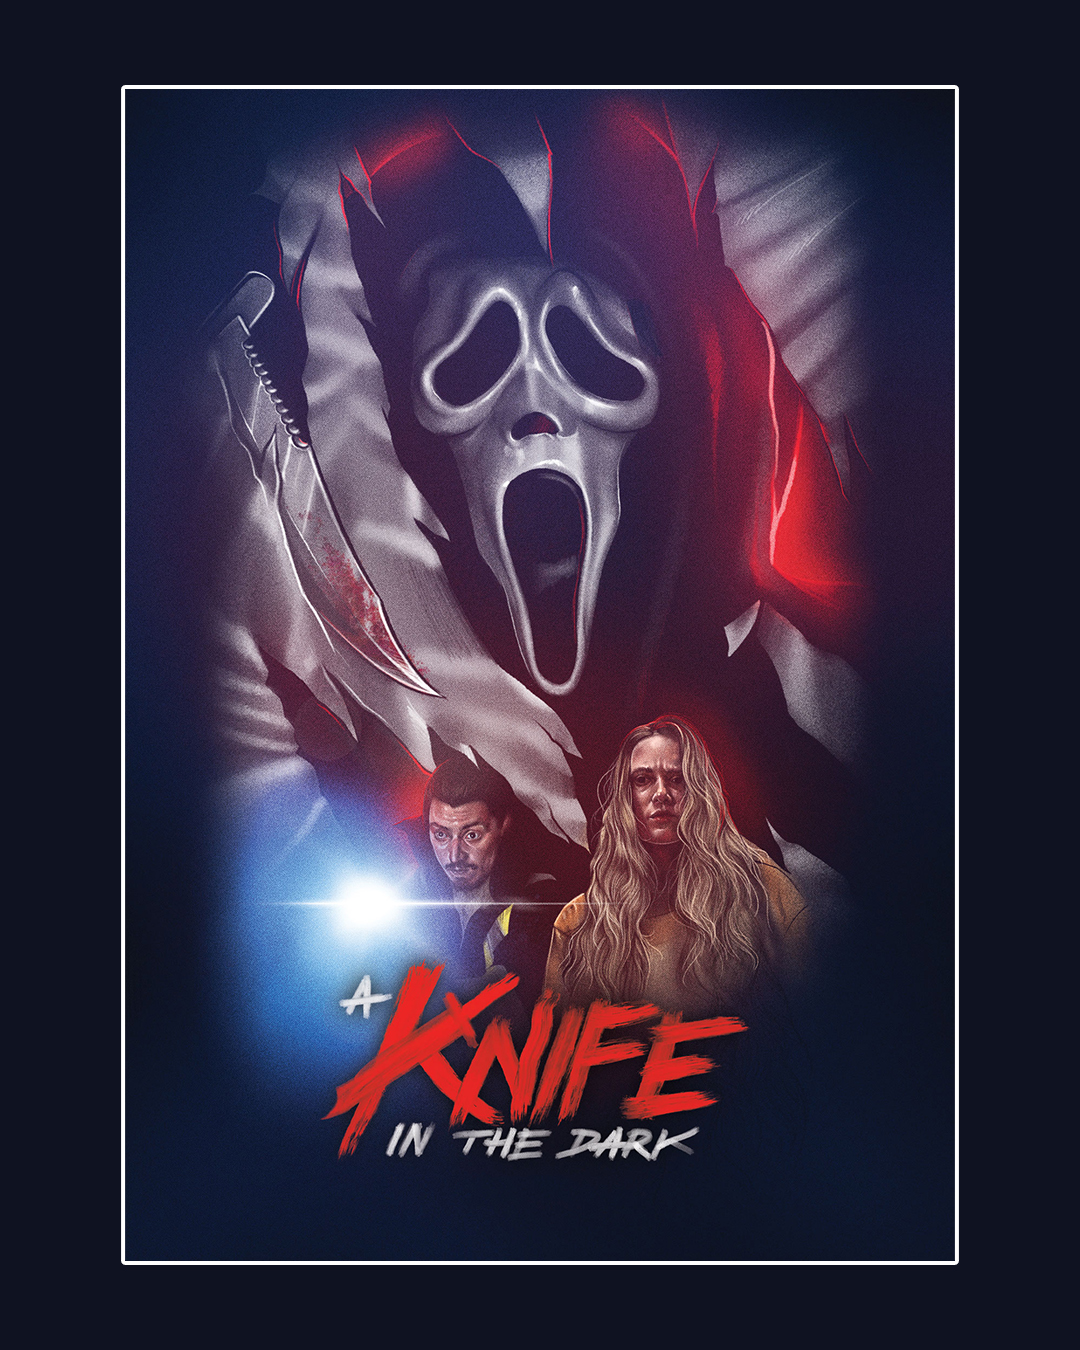 A Knife in the Dark: Chapter 2 (2020)